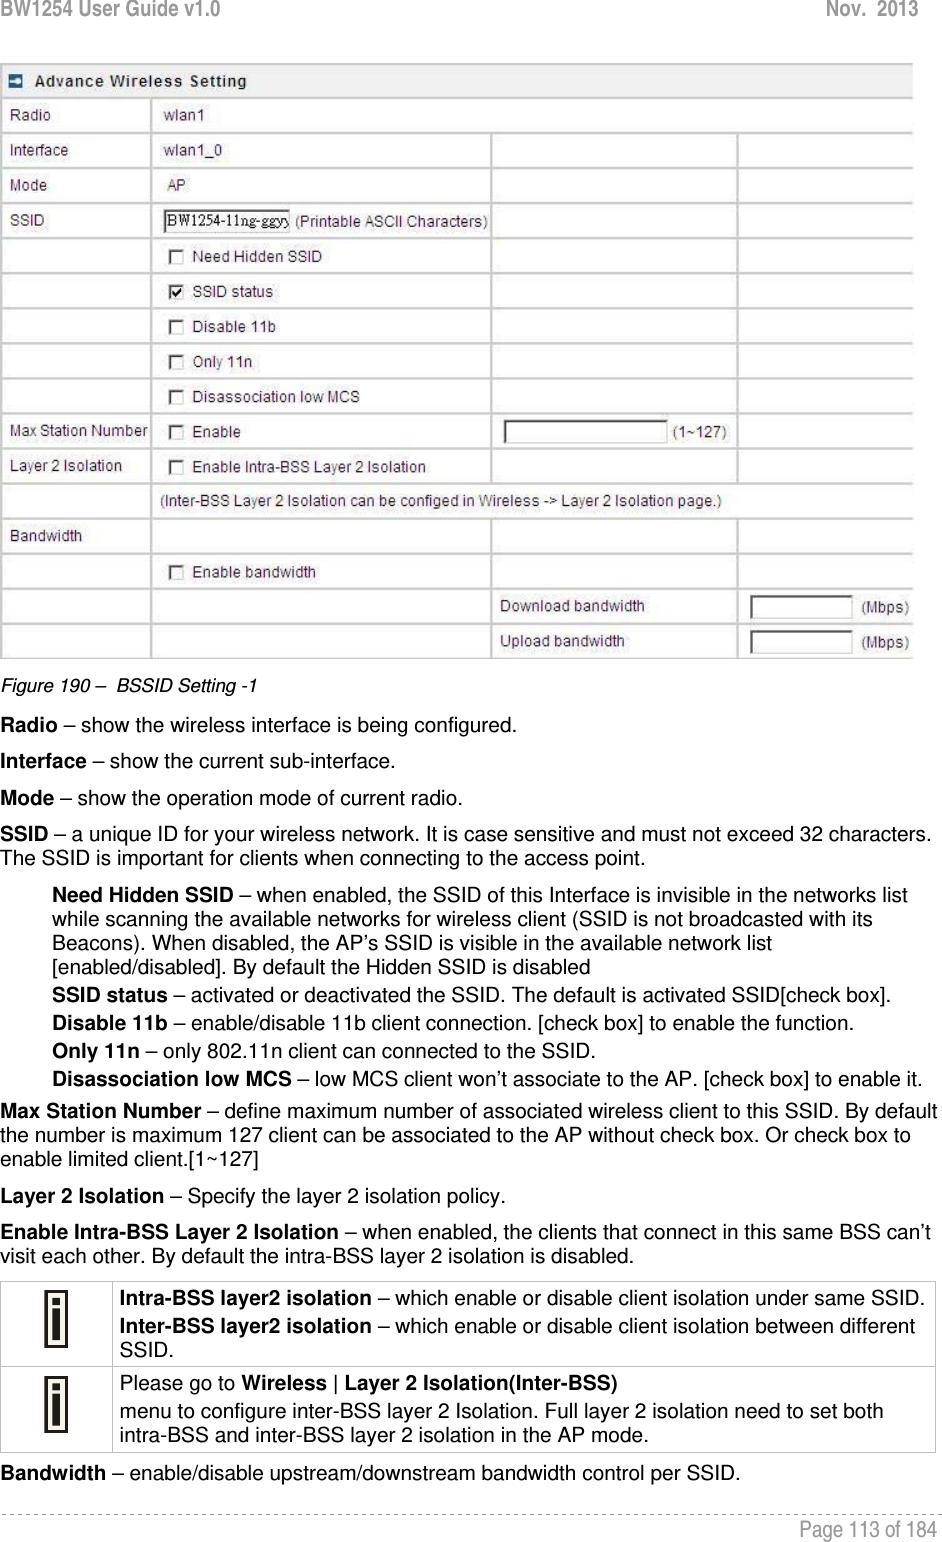 BW1254 User Guide v1.0  Nov.  2013     Page 113 of 184    Figure 190 –  BSSID Setting -1 Radio – show the wireless interface is being configured. Interface – show the current sub-interface. Mode – show the operation mode of current radio. SSID – a unique ID for your wireless network. It is case sensitive and must not exceed 32 characters. The SSID is important for clients when connecting to the access point.  Need Hidden SSID – when enabled, the SSID of this Interface is invisible in the networks list while scanning the available networks for wireless client (SSID is not broadcasted with its Beacons). When disabled, the AP’s SSID is visible in the available network list [enabled/disabled]. By default the Hidden SSID is disabled SSID status – activated or deactivated the SSID. The default is activated SSID[check box]. Disable 11b – enable/disable 11b client connection. [check box] to enable the function. Only 11n – only 802.11n client can connected to the SSID. Disassociation low MCS – low MCS client won’t associate to the AP. [check box] to enable it. Max Station Number – define maximum number of associated wireless client to this SSID. By default the number is maximum 127 client can be associated to the AP without check box. Or check box to enable limited client.[1~127] Layer 2 Isolation – Specify the layer 2 isolation policy. Enable Intra-BSS Layer 2 Isolation – when enabled, the clients that connect in this same BSS can’t visit each other. By default the intra-BSS layer 2 isolation is disabled.  Intra-BSS layer2 isolation – which enable or disable client isolation under same SSID.Inter-BSS layer2 isolation – which enable or disable client isolation between different SSID.  Please go to Wireless | Layer 2 Isolation(Inter-BSS) menu to configure inter-BSS layer 2 Isolation. Full layer 2 isolation need to set both intra-BSS and inter-BSS layer 2 isolation in the AP mode. Bandwidth – enable/disable upstream/downstream bandwidth control per SSID. 